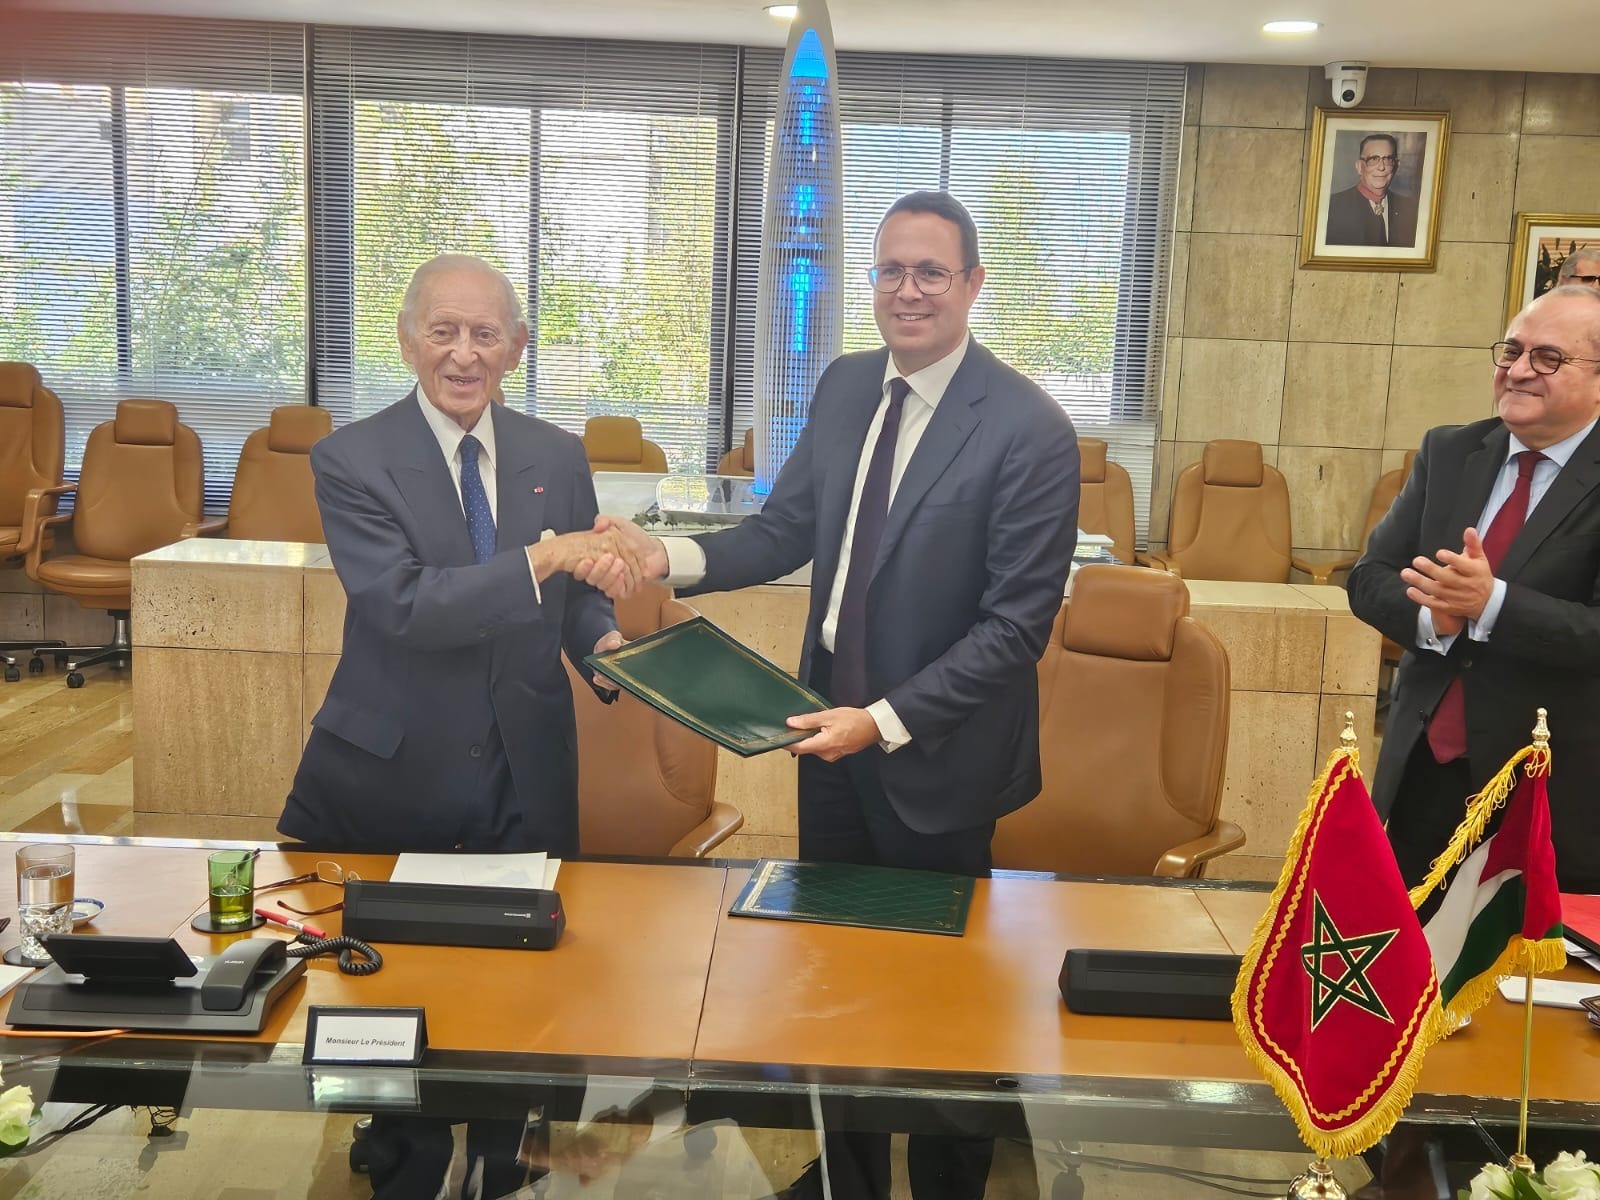 A strategic partnership is sealed between BANK OF AFRICA and BANK OF PALESTINE